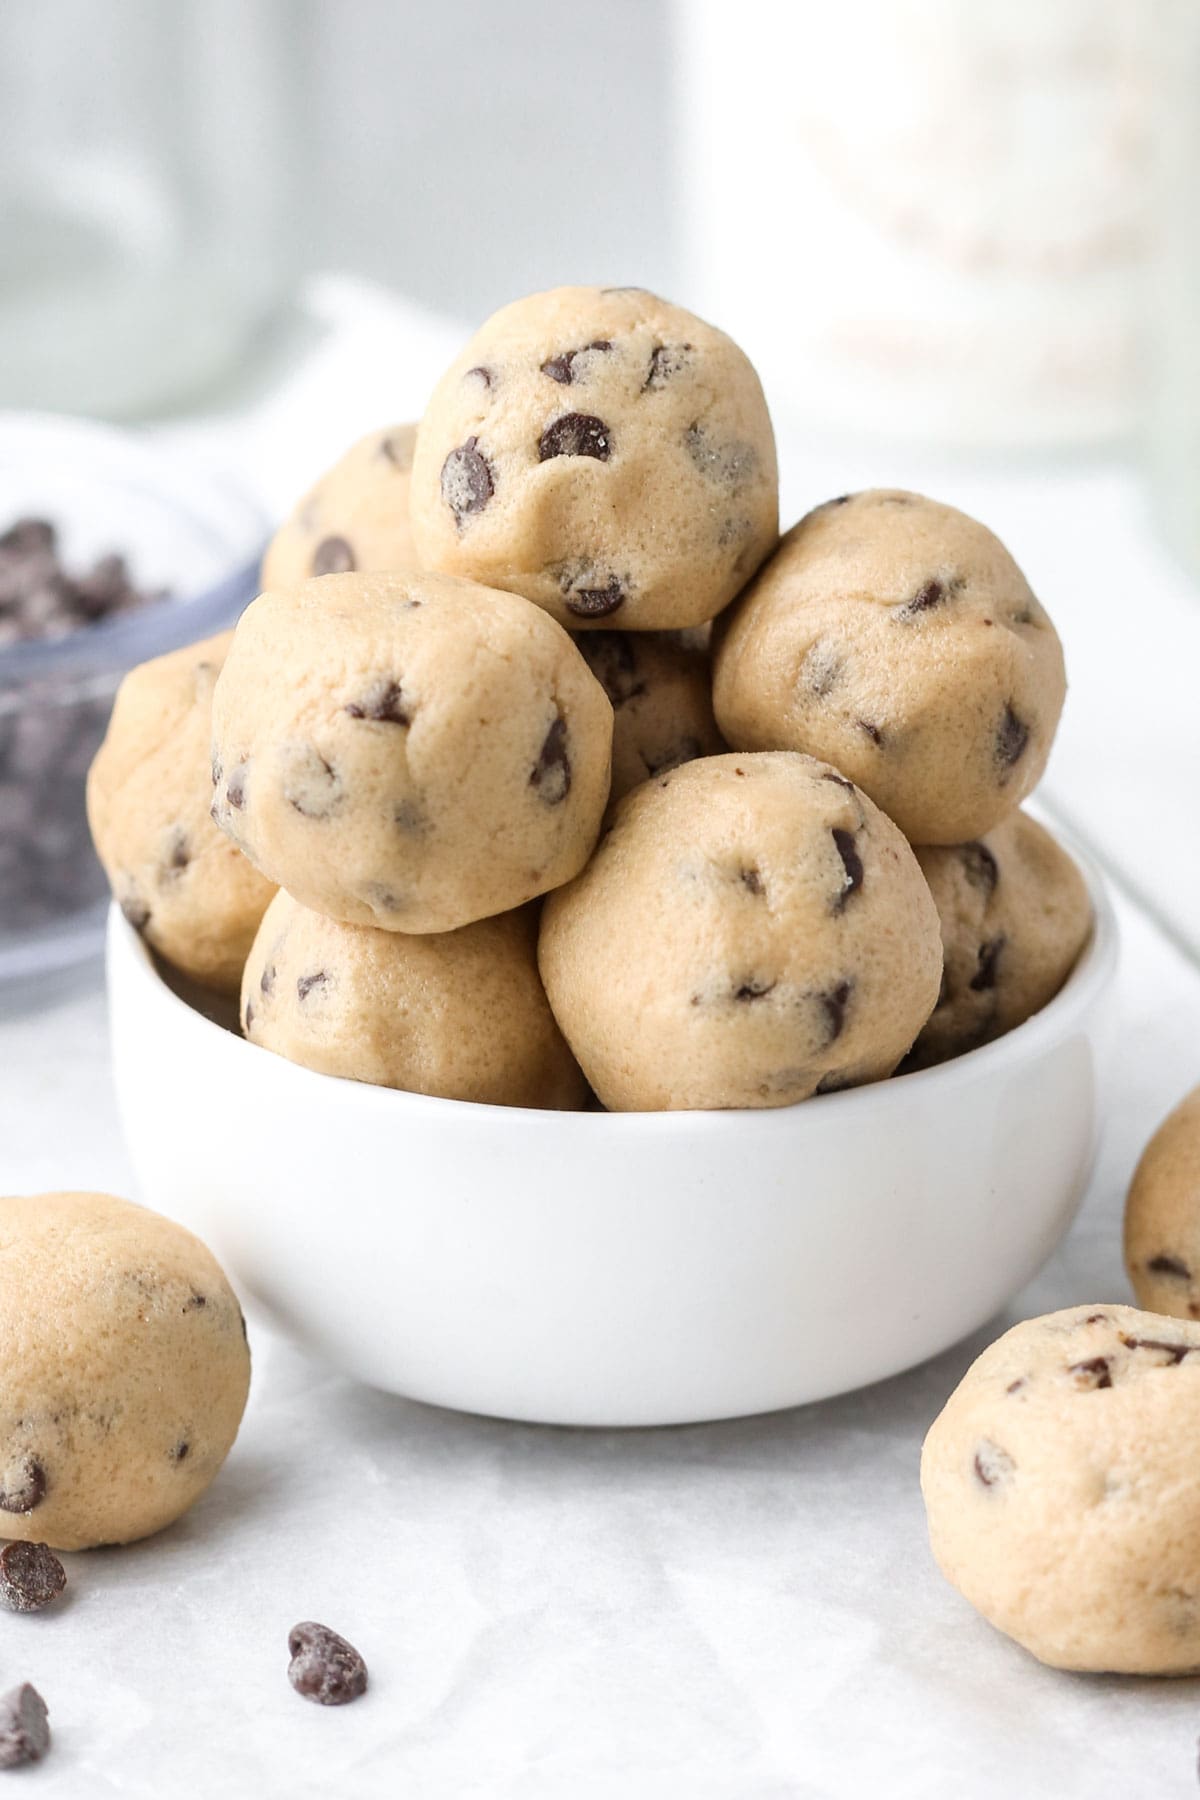 A bowl of edible cookie ball bites on a table.